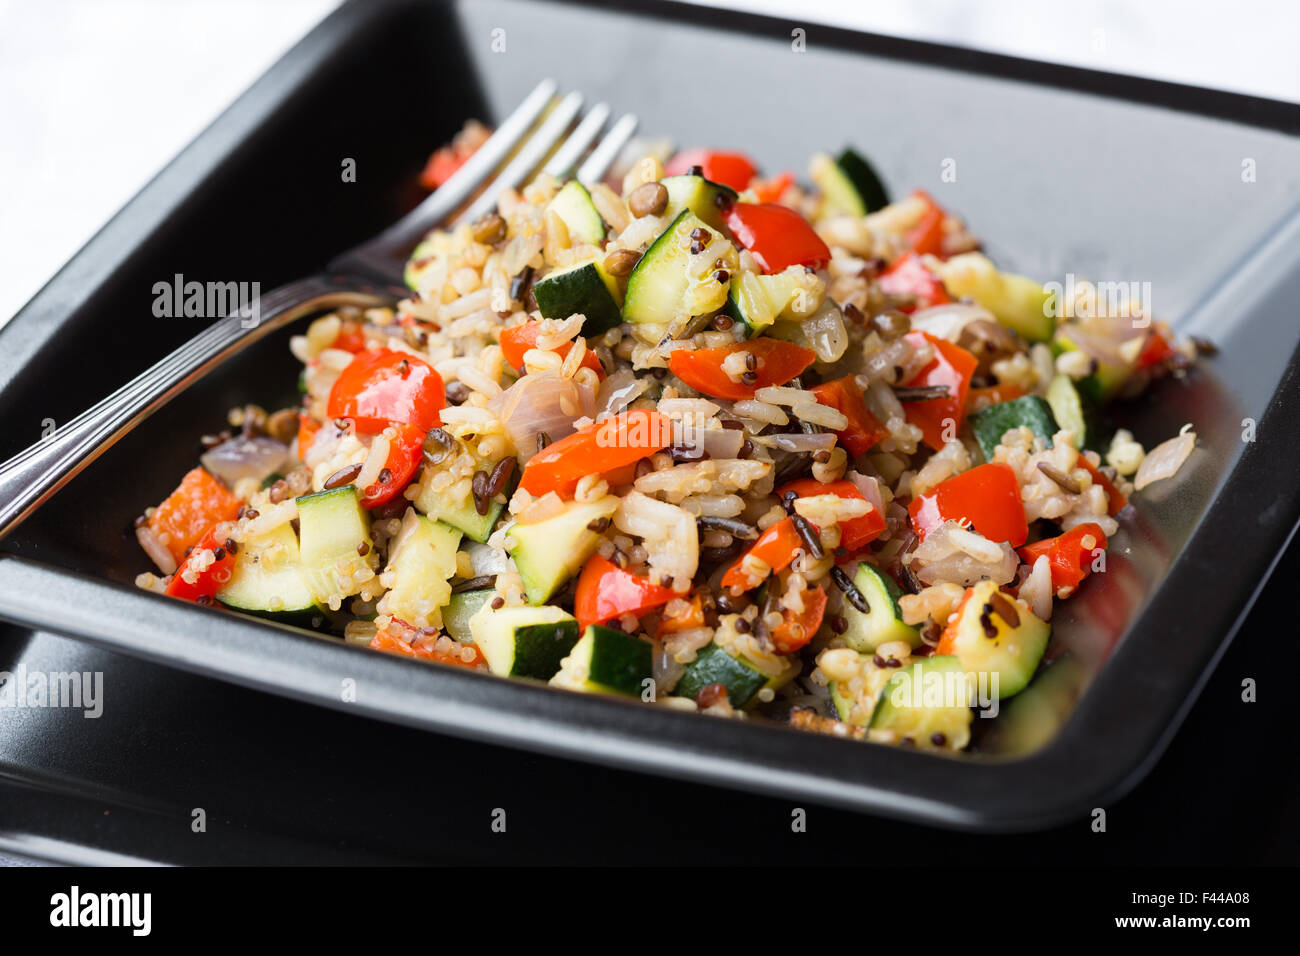 Cereal salad mix with vegetables Stock Photo